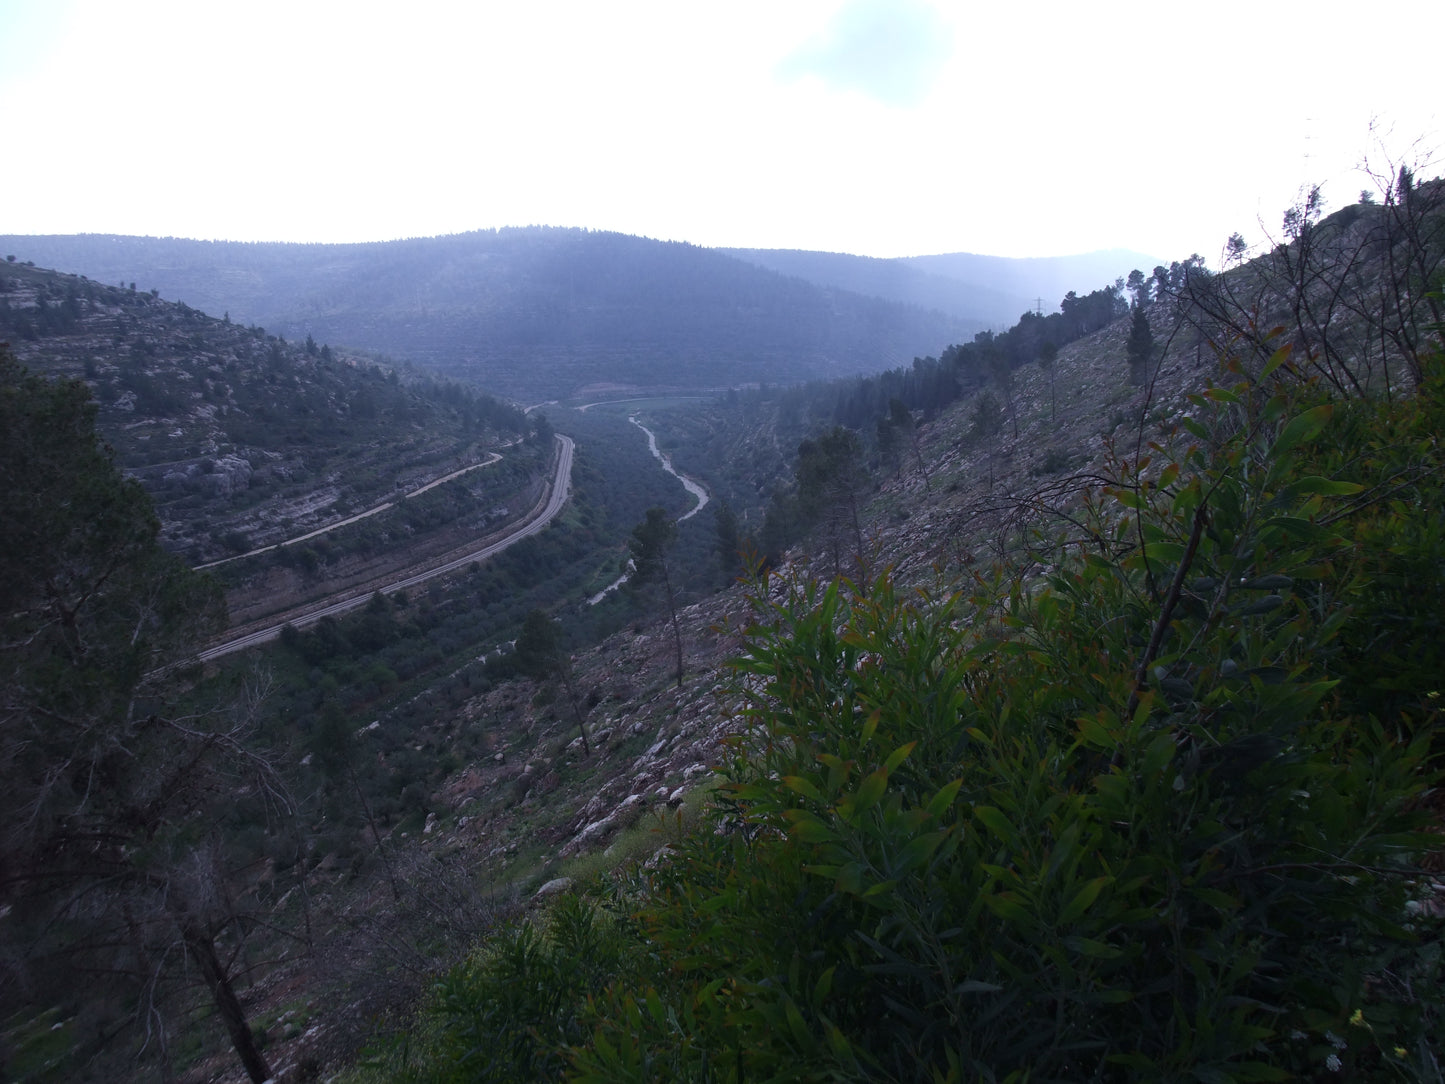 Amazing Landscapes of Israel, Views of the Holy Land